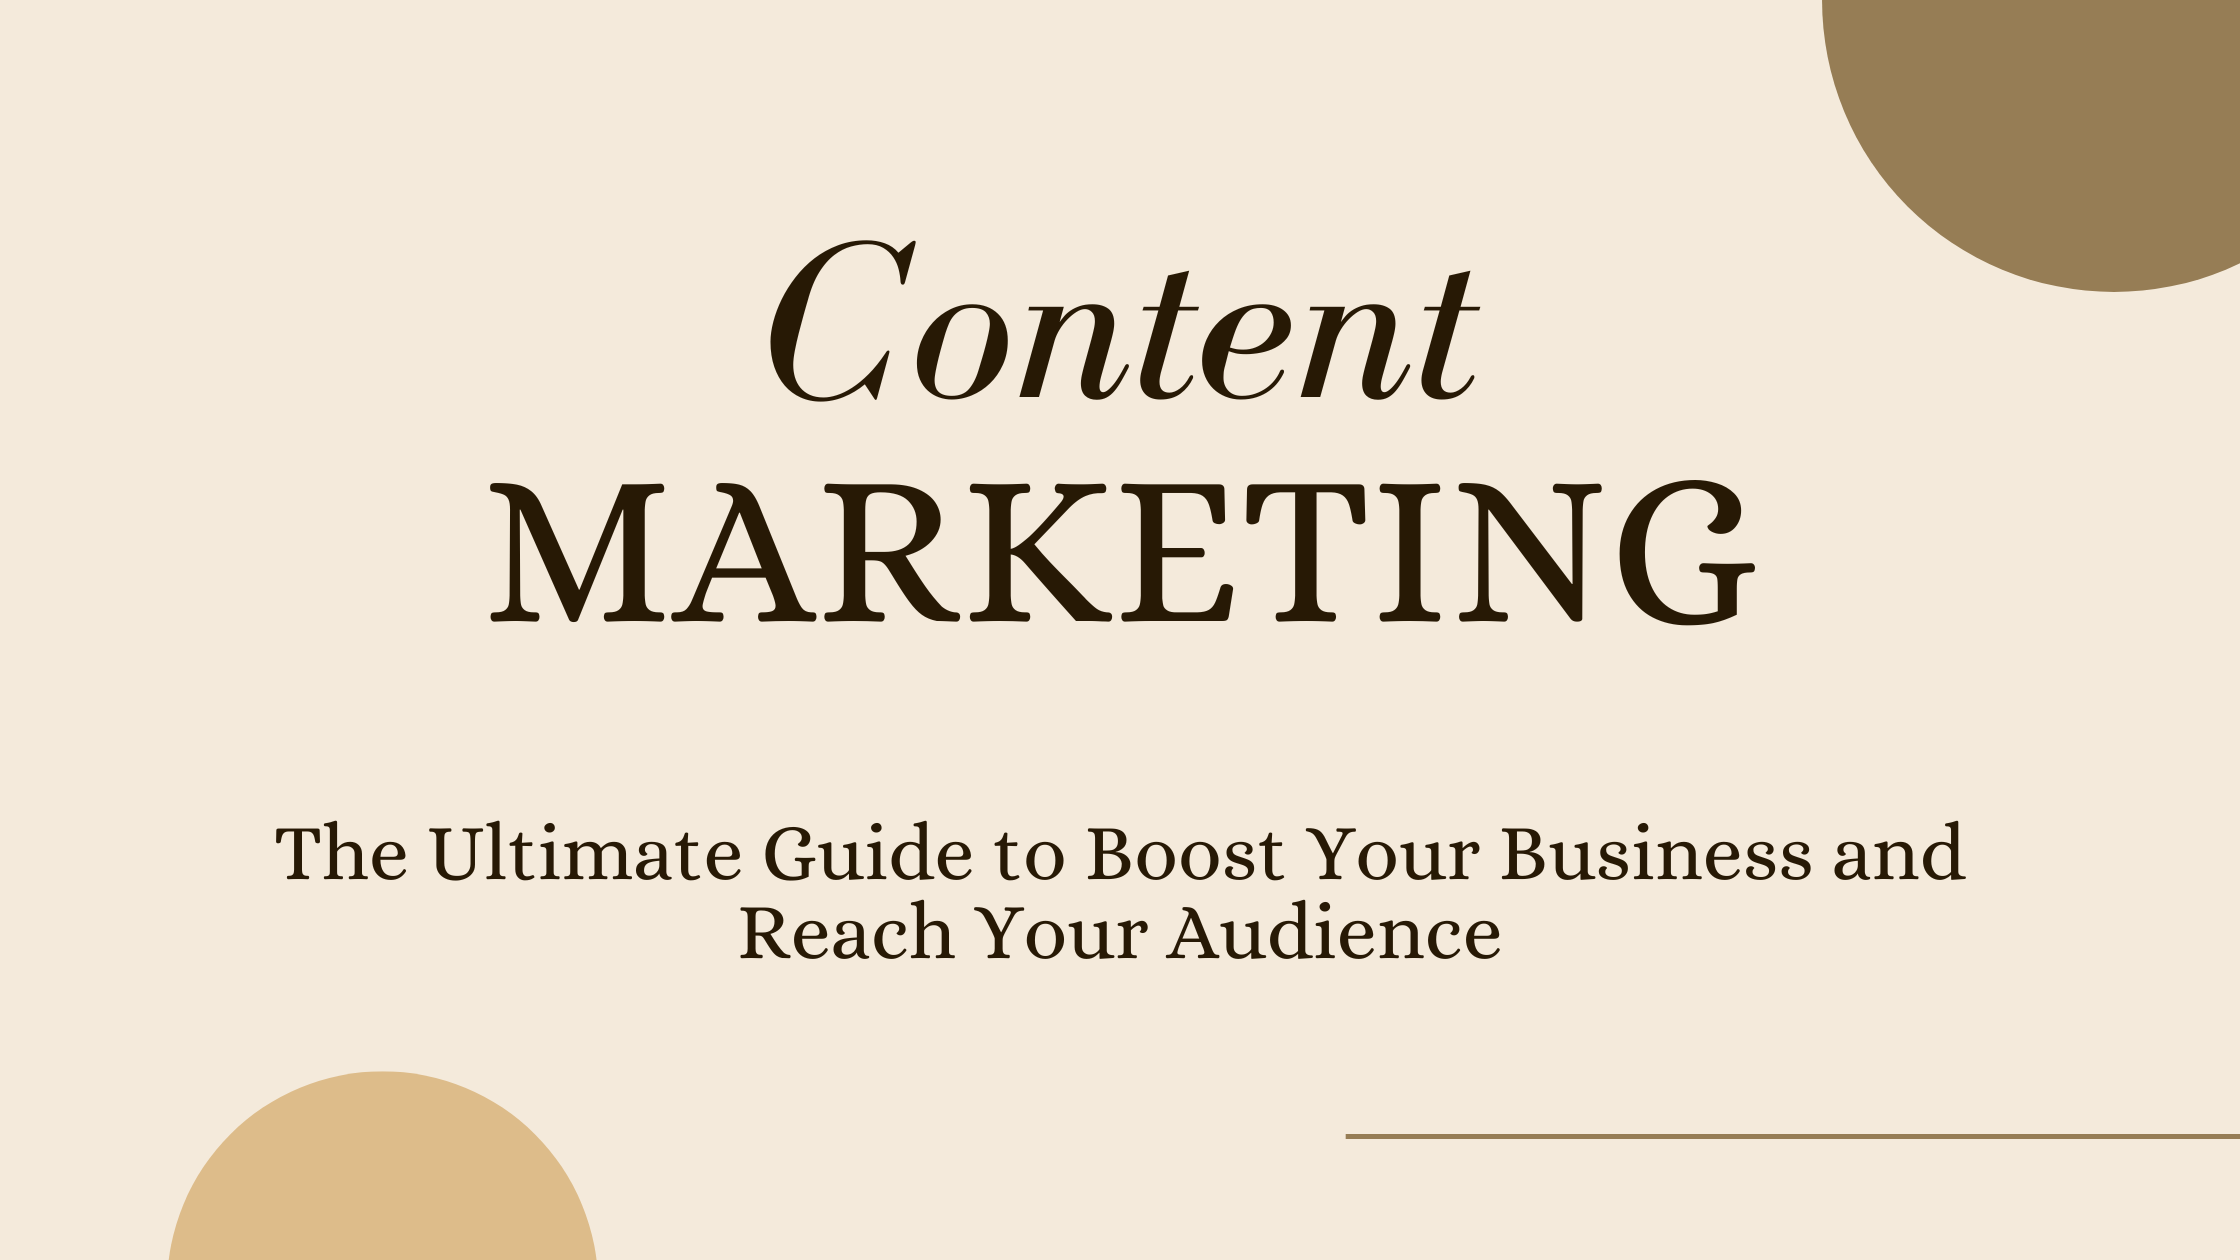 Content Marketing: The Ultimate Guide to Boost Your Business and Reach Your Audience